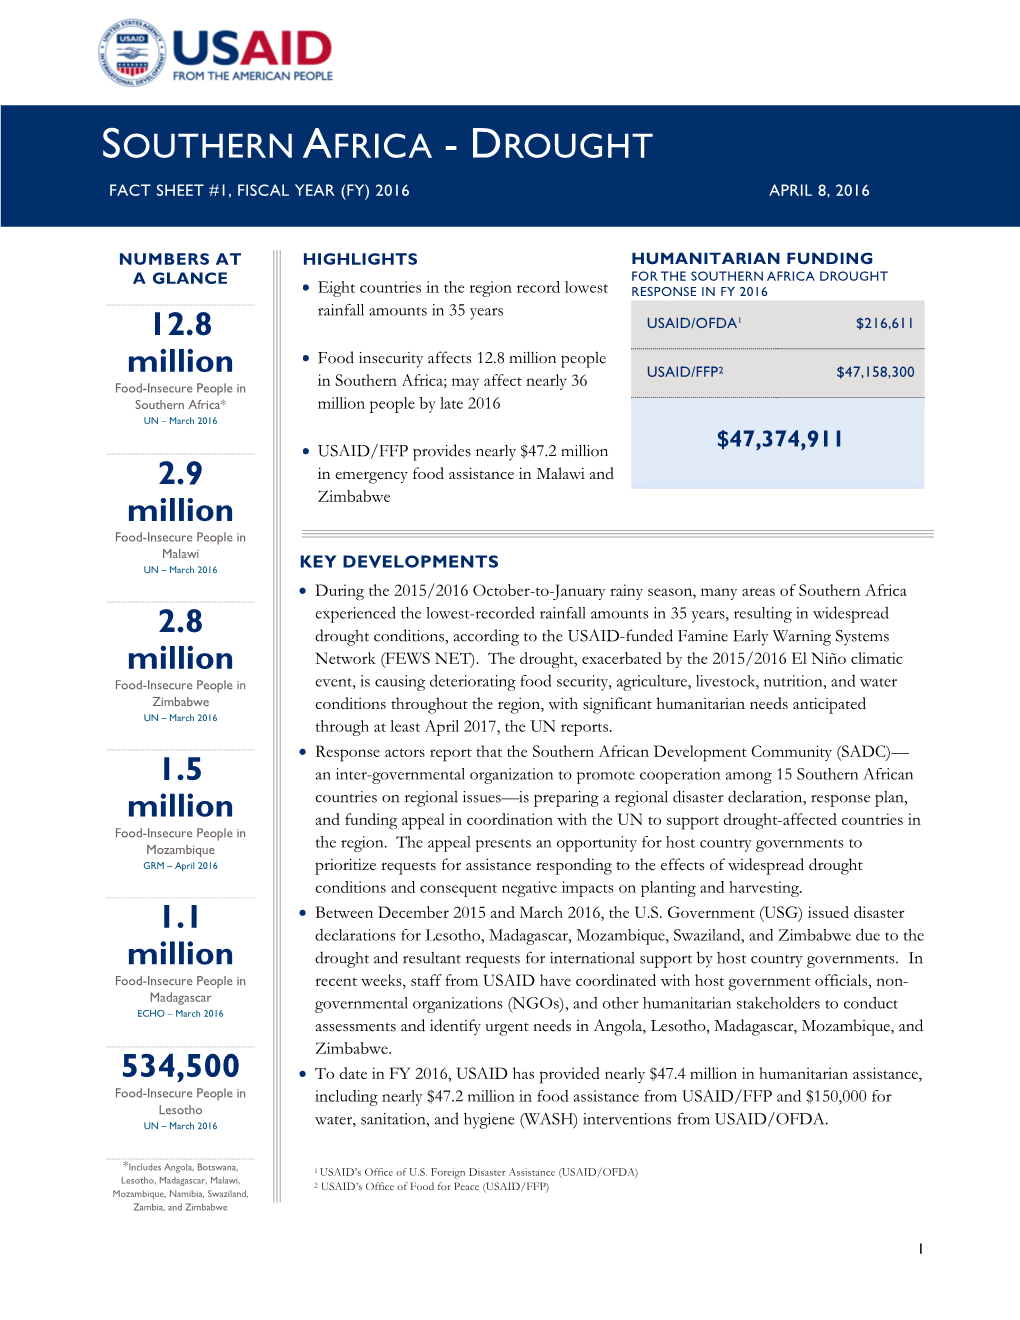 Southern Africa - Drought Fact Sheet #1, Fiscal Year (Fy) 2016 April 8, 2016